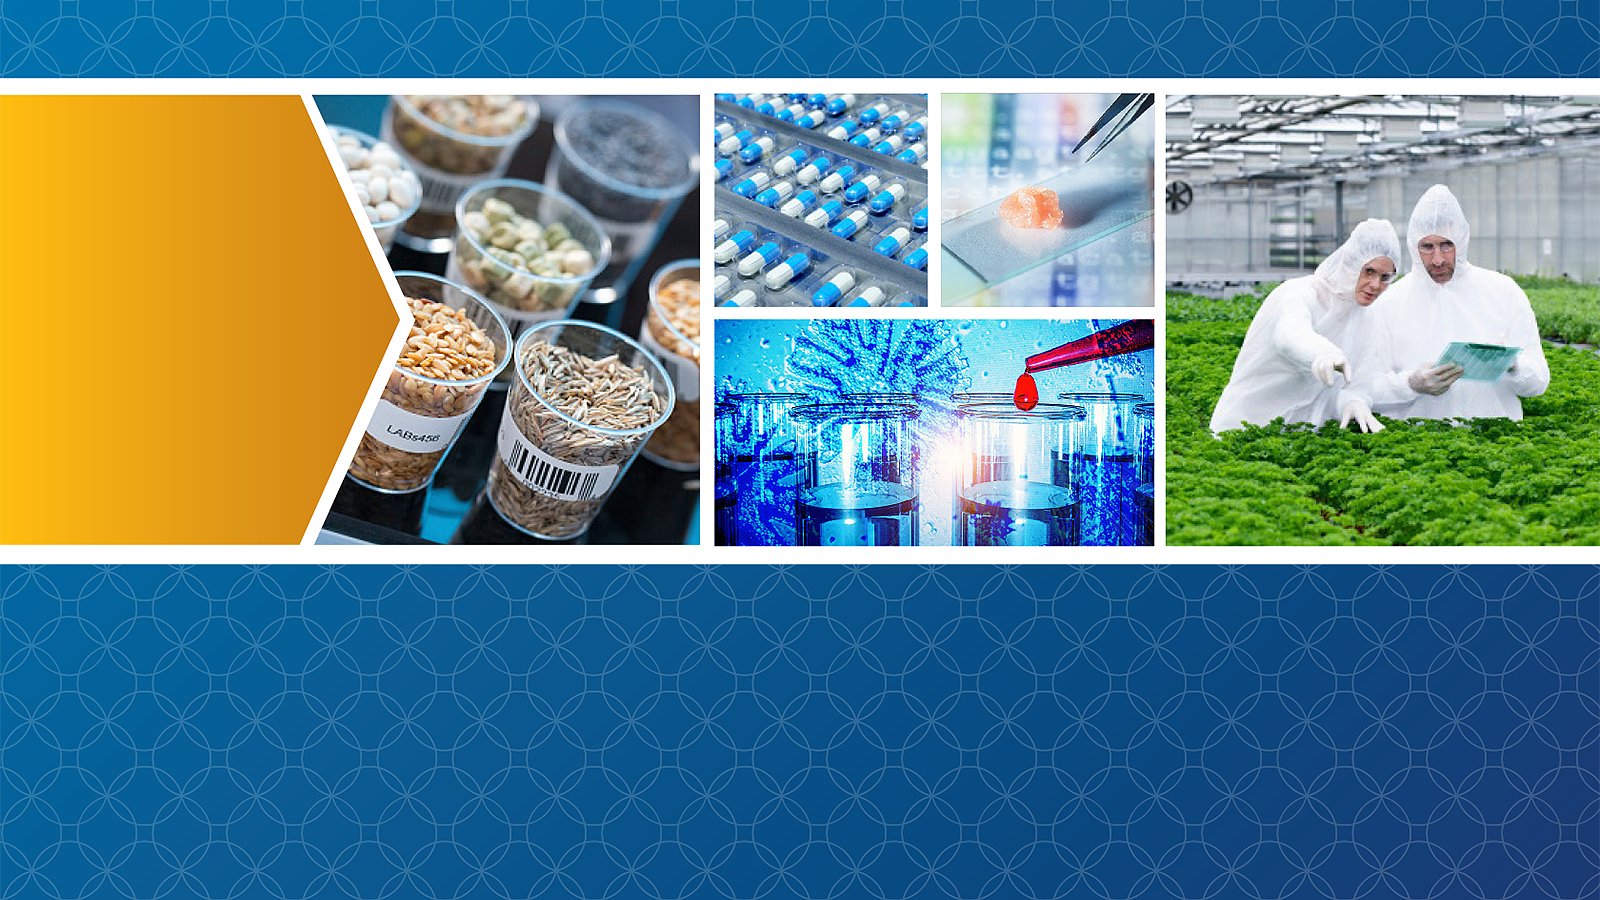 A collage of photos showing samples of seeds and cereals in a food safety laboratory, capsule packaging on a production line, synthetic meat on a glass slide, blood cells research, and scientists in a greenhouse examining a parsley plant.